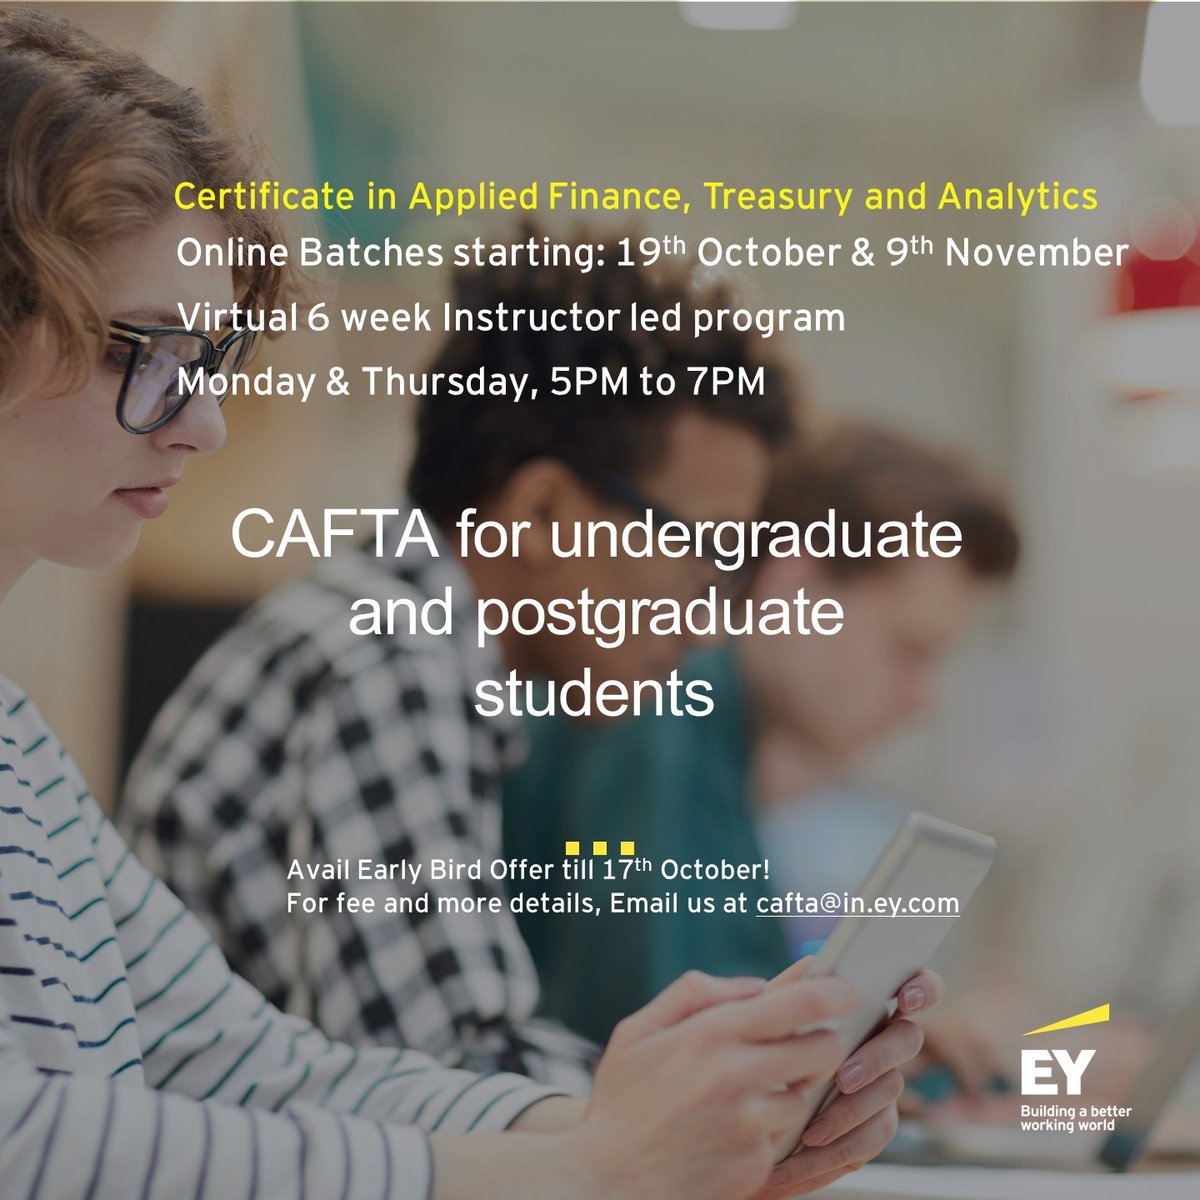 Ever heard of an upskill program that offers practical industry insights from subject matter experts, internship opportunities, networking opportunities, mentoring and much more altogether! If not, then check out EY’s CAFTA!
#EYCAFTA continues with its 6 weeks instructor .